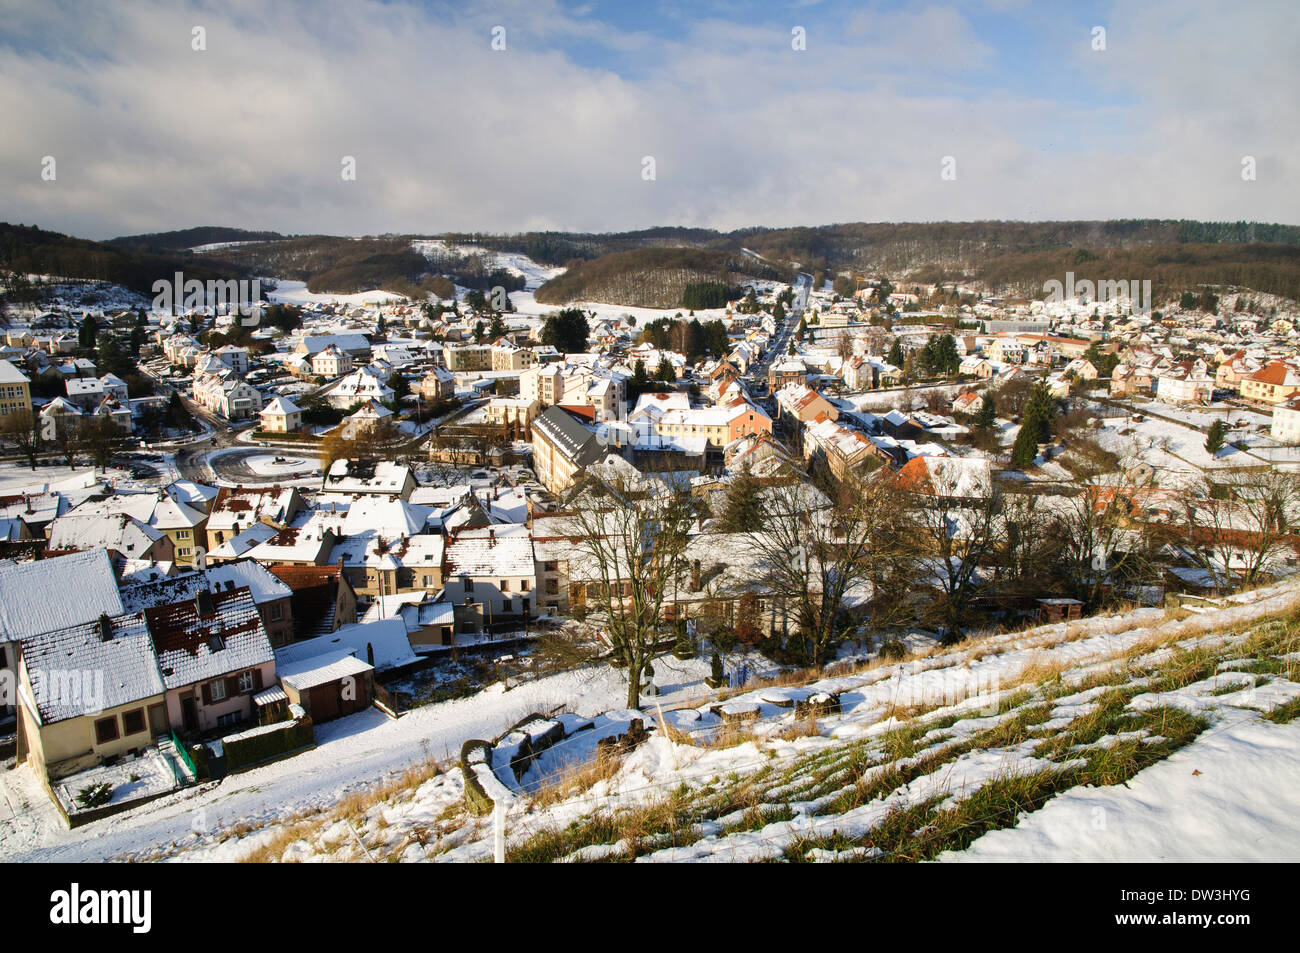 The town of Bitche in the Vosges Regional Natural Park, Northern France. December. Stock Photo